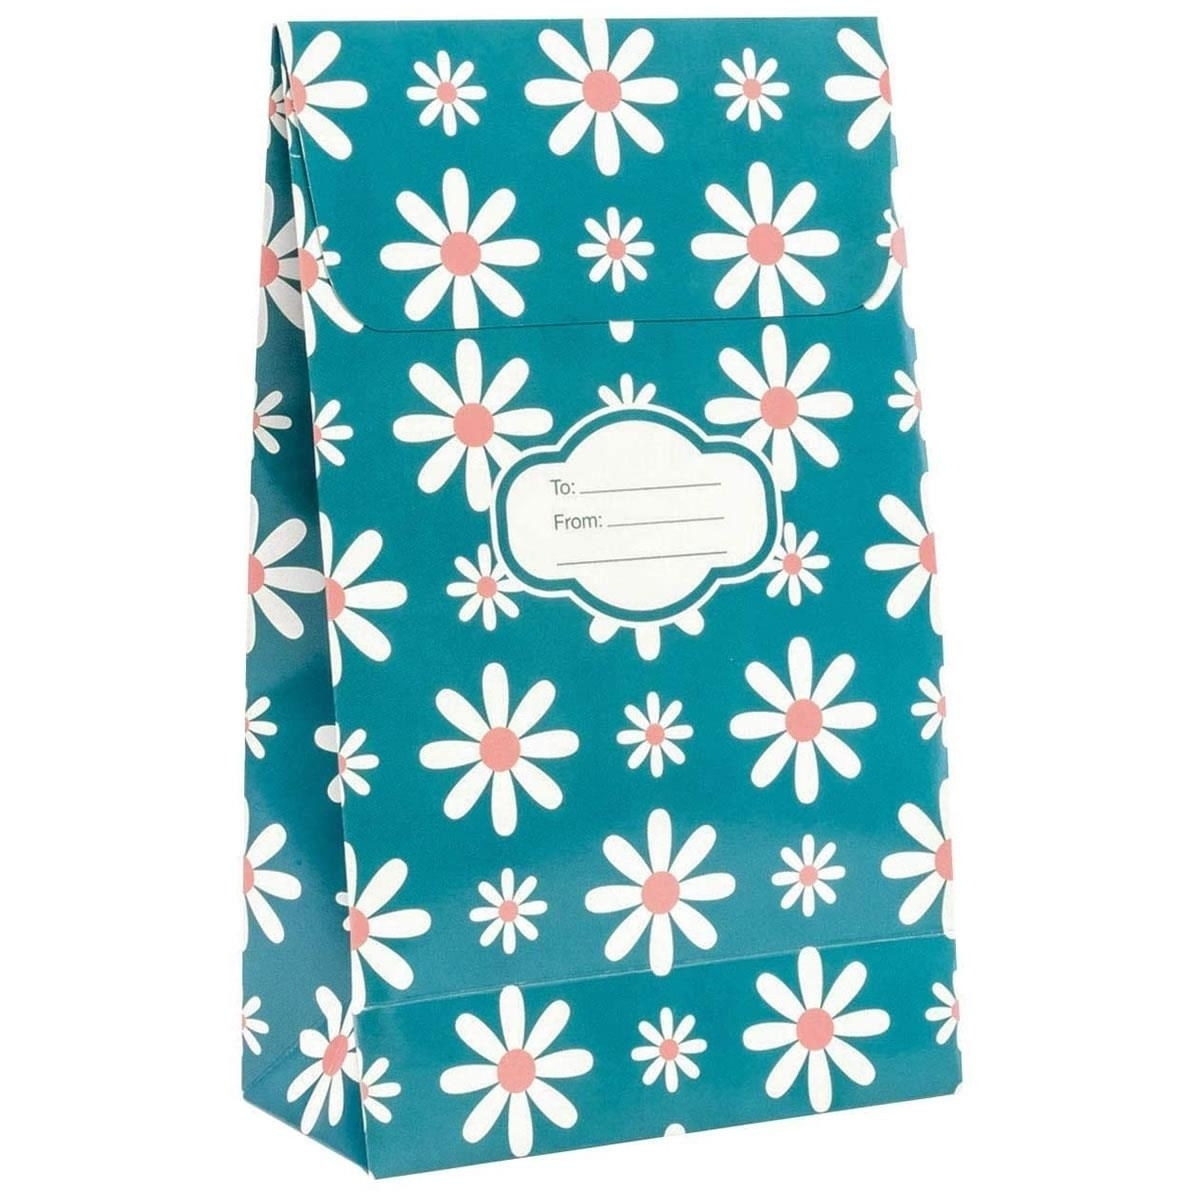 Pressie Pouch Peel & Seal Gift Bag Blue Daisy Flower 12pk Large No-Wrap Present